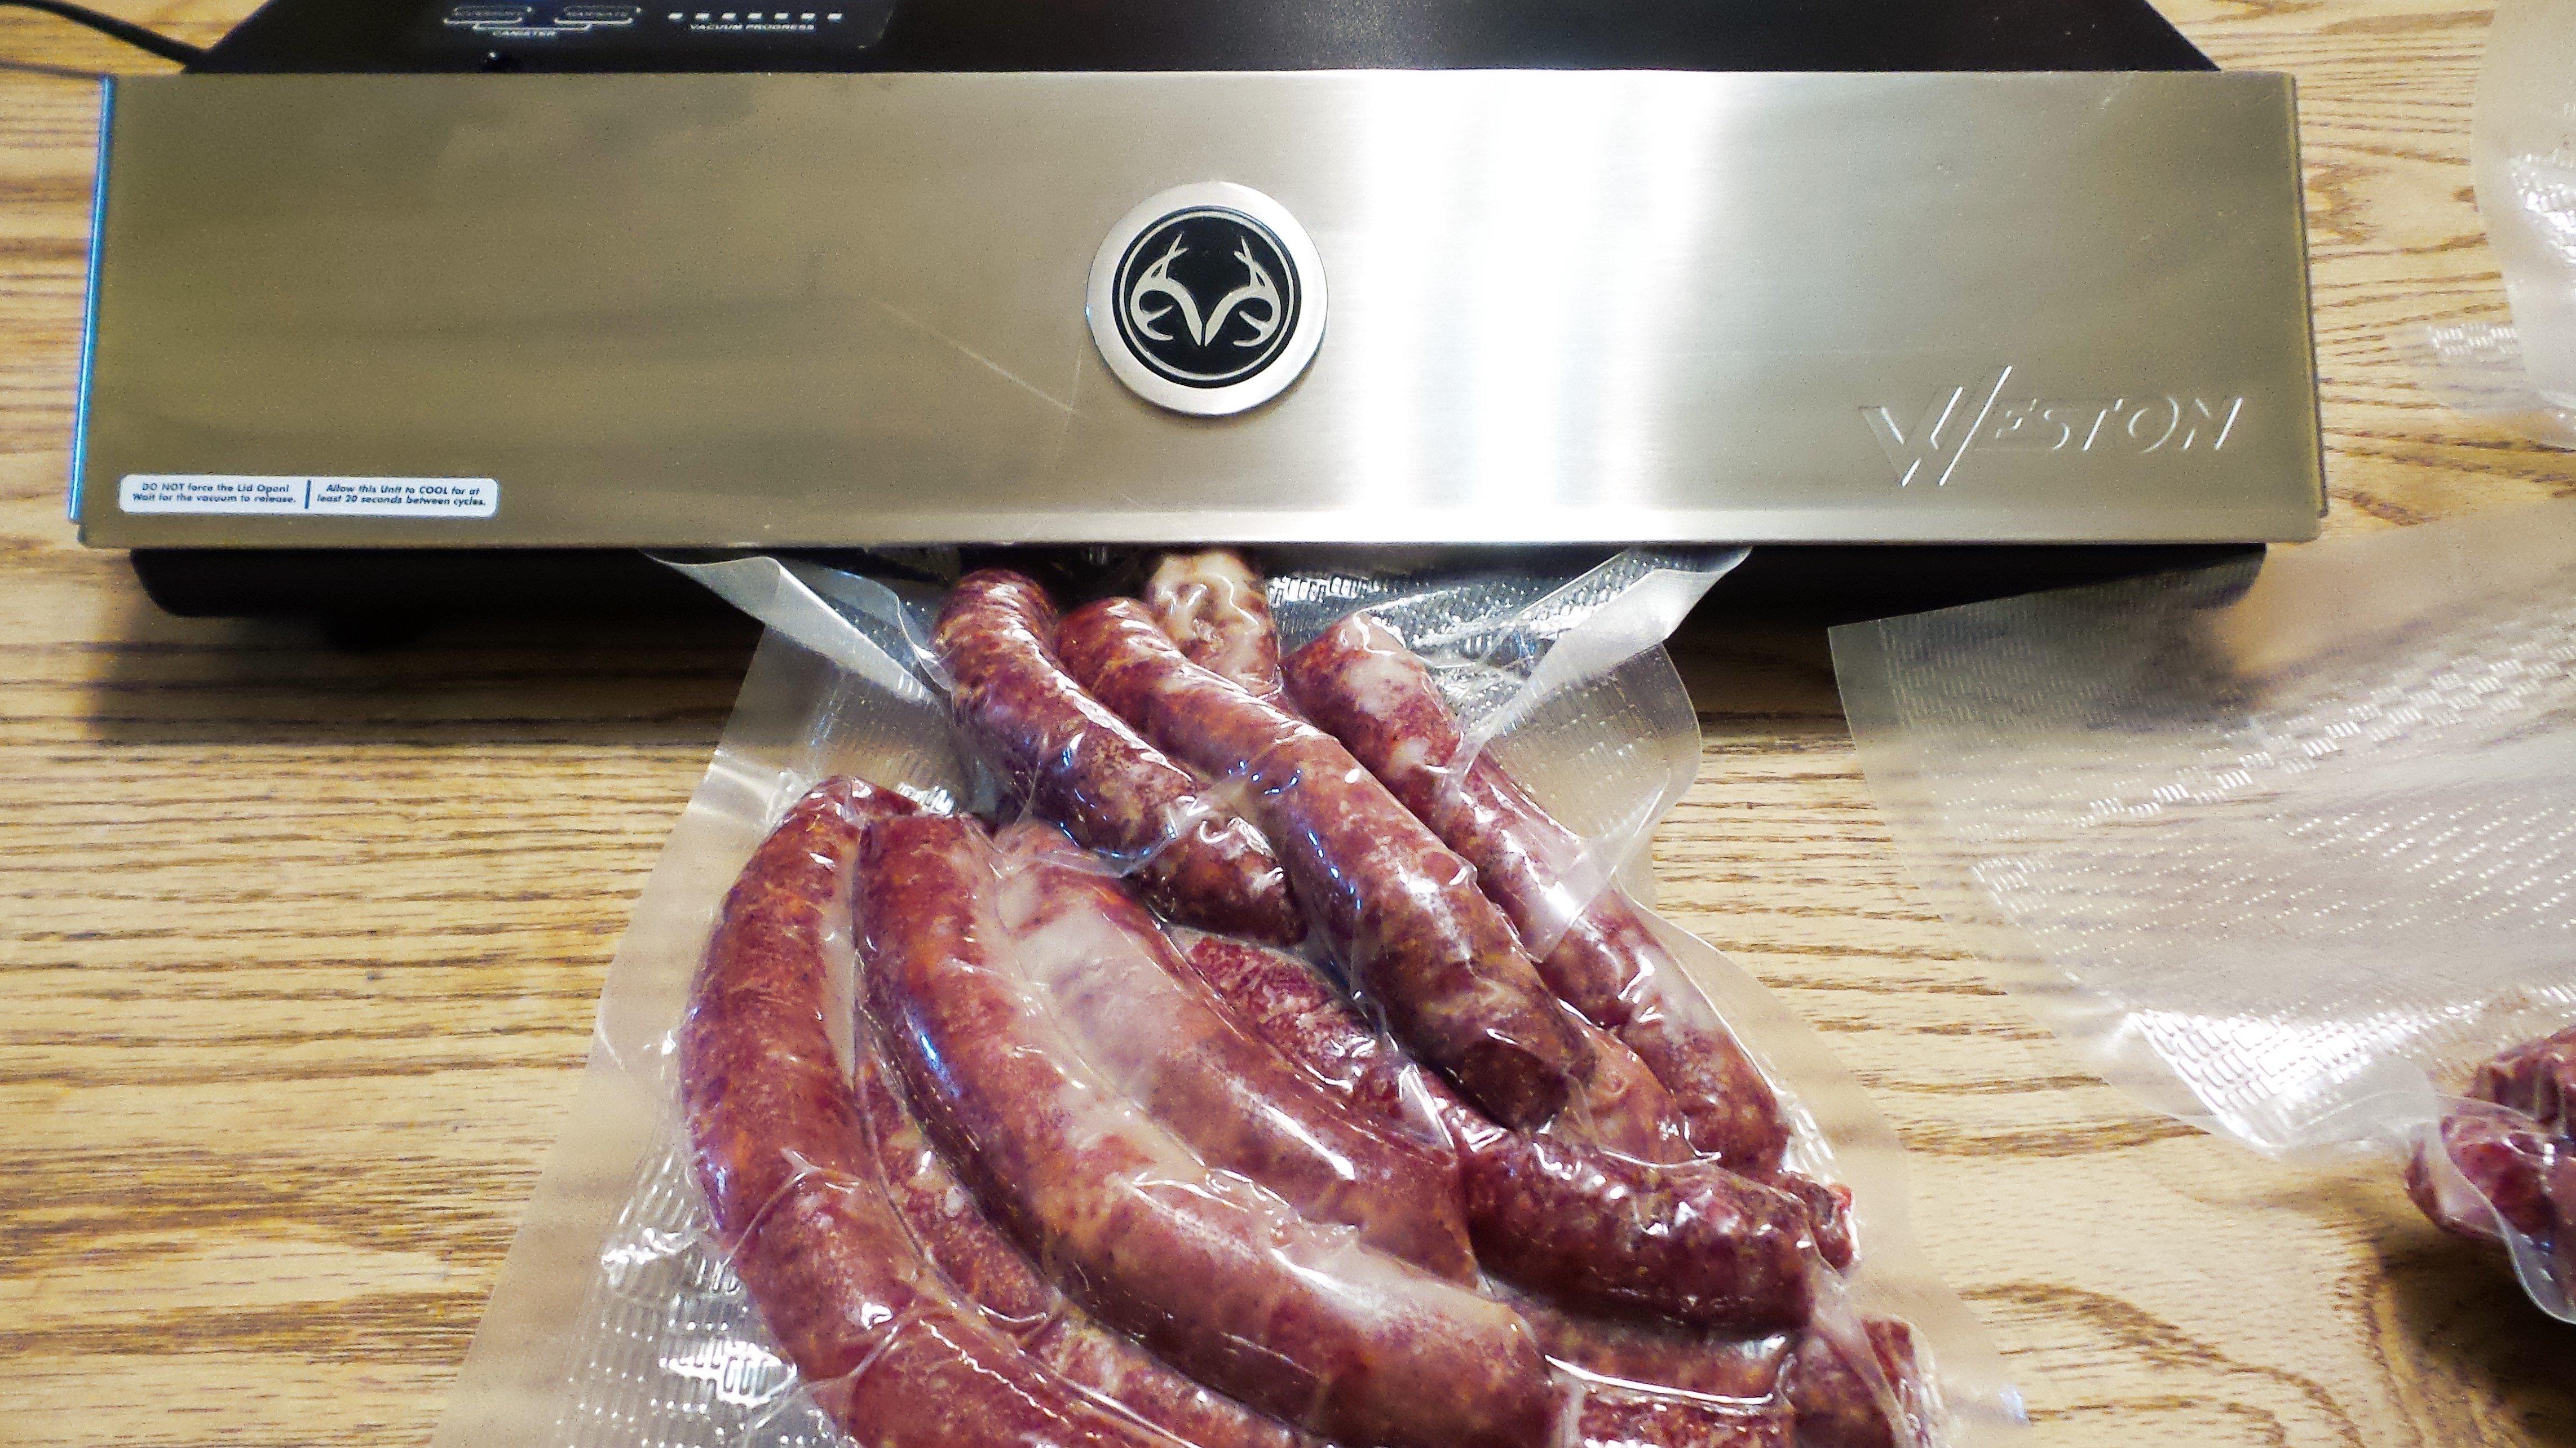 Vacuum sealing allows for longer storage options.